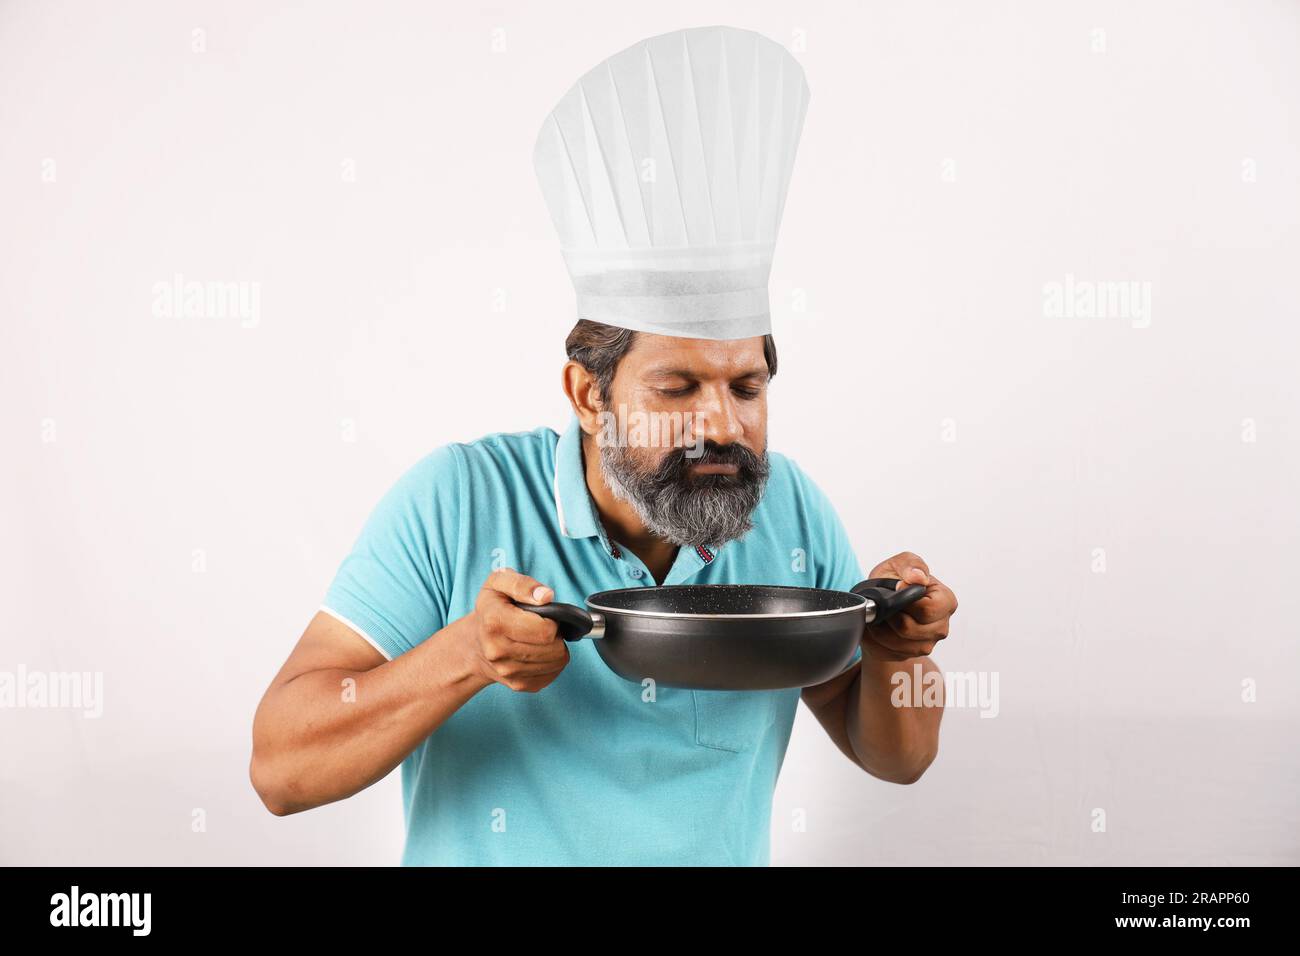 Portrait of Indian bearded chef man wearing t-shirt and chef cap. Happy smiling expressions white background. Holding spatula and frying spoon in hand Stock Photo